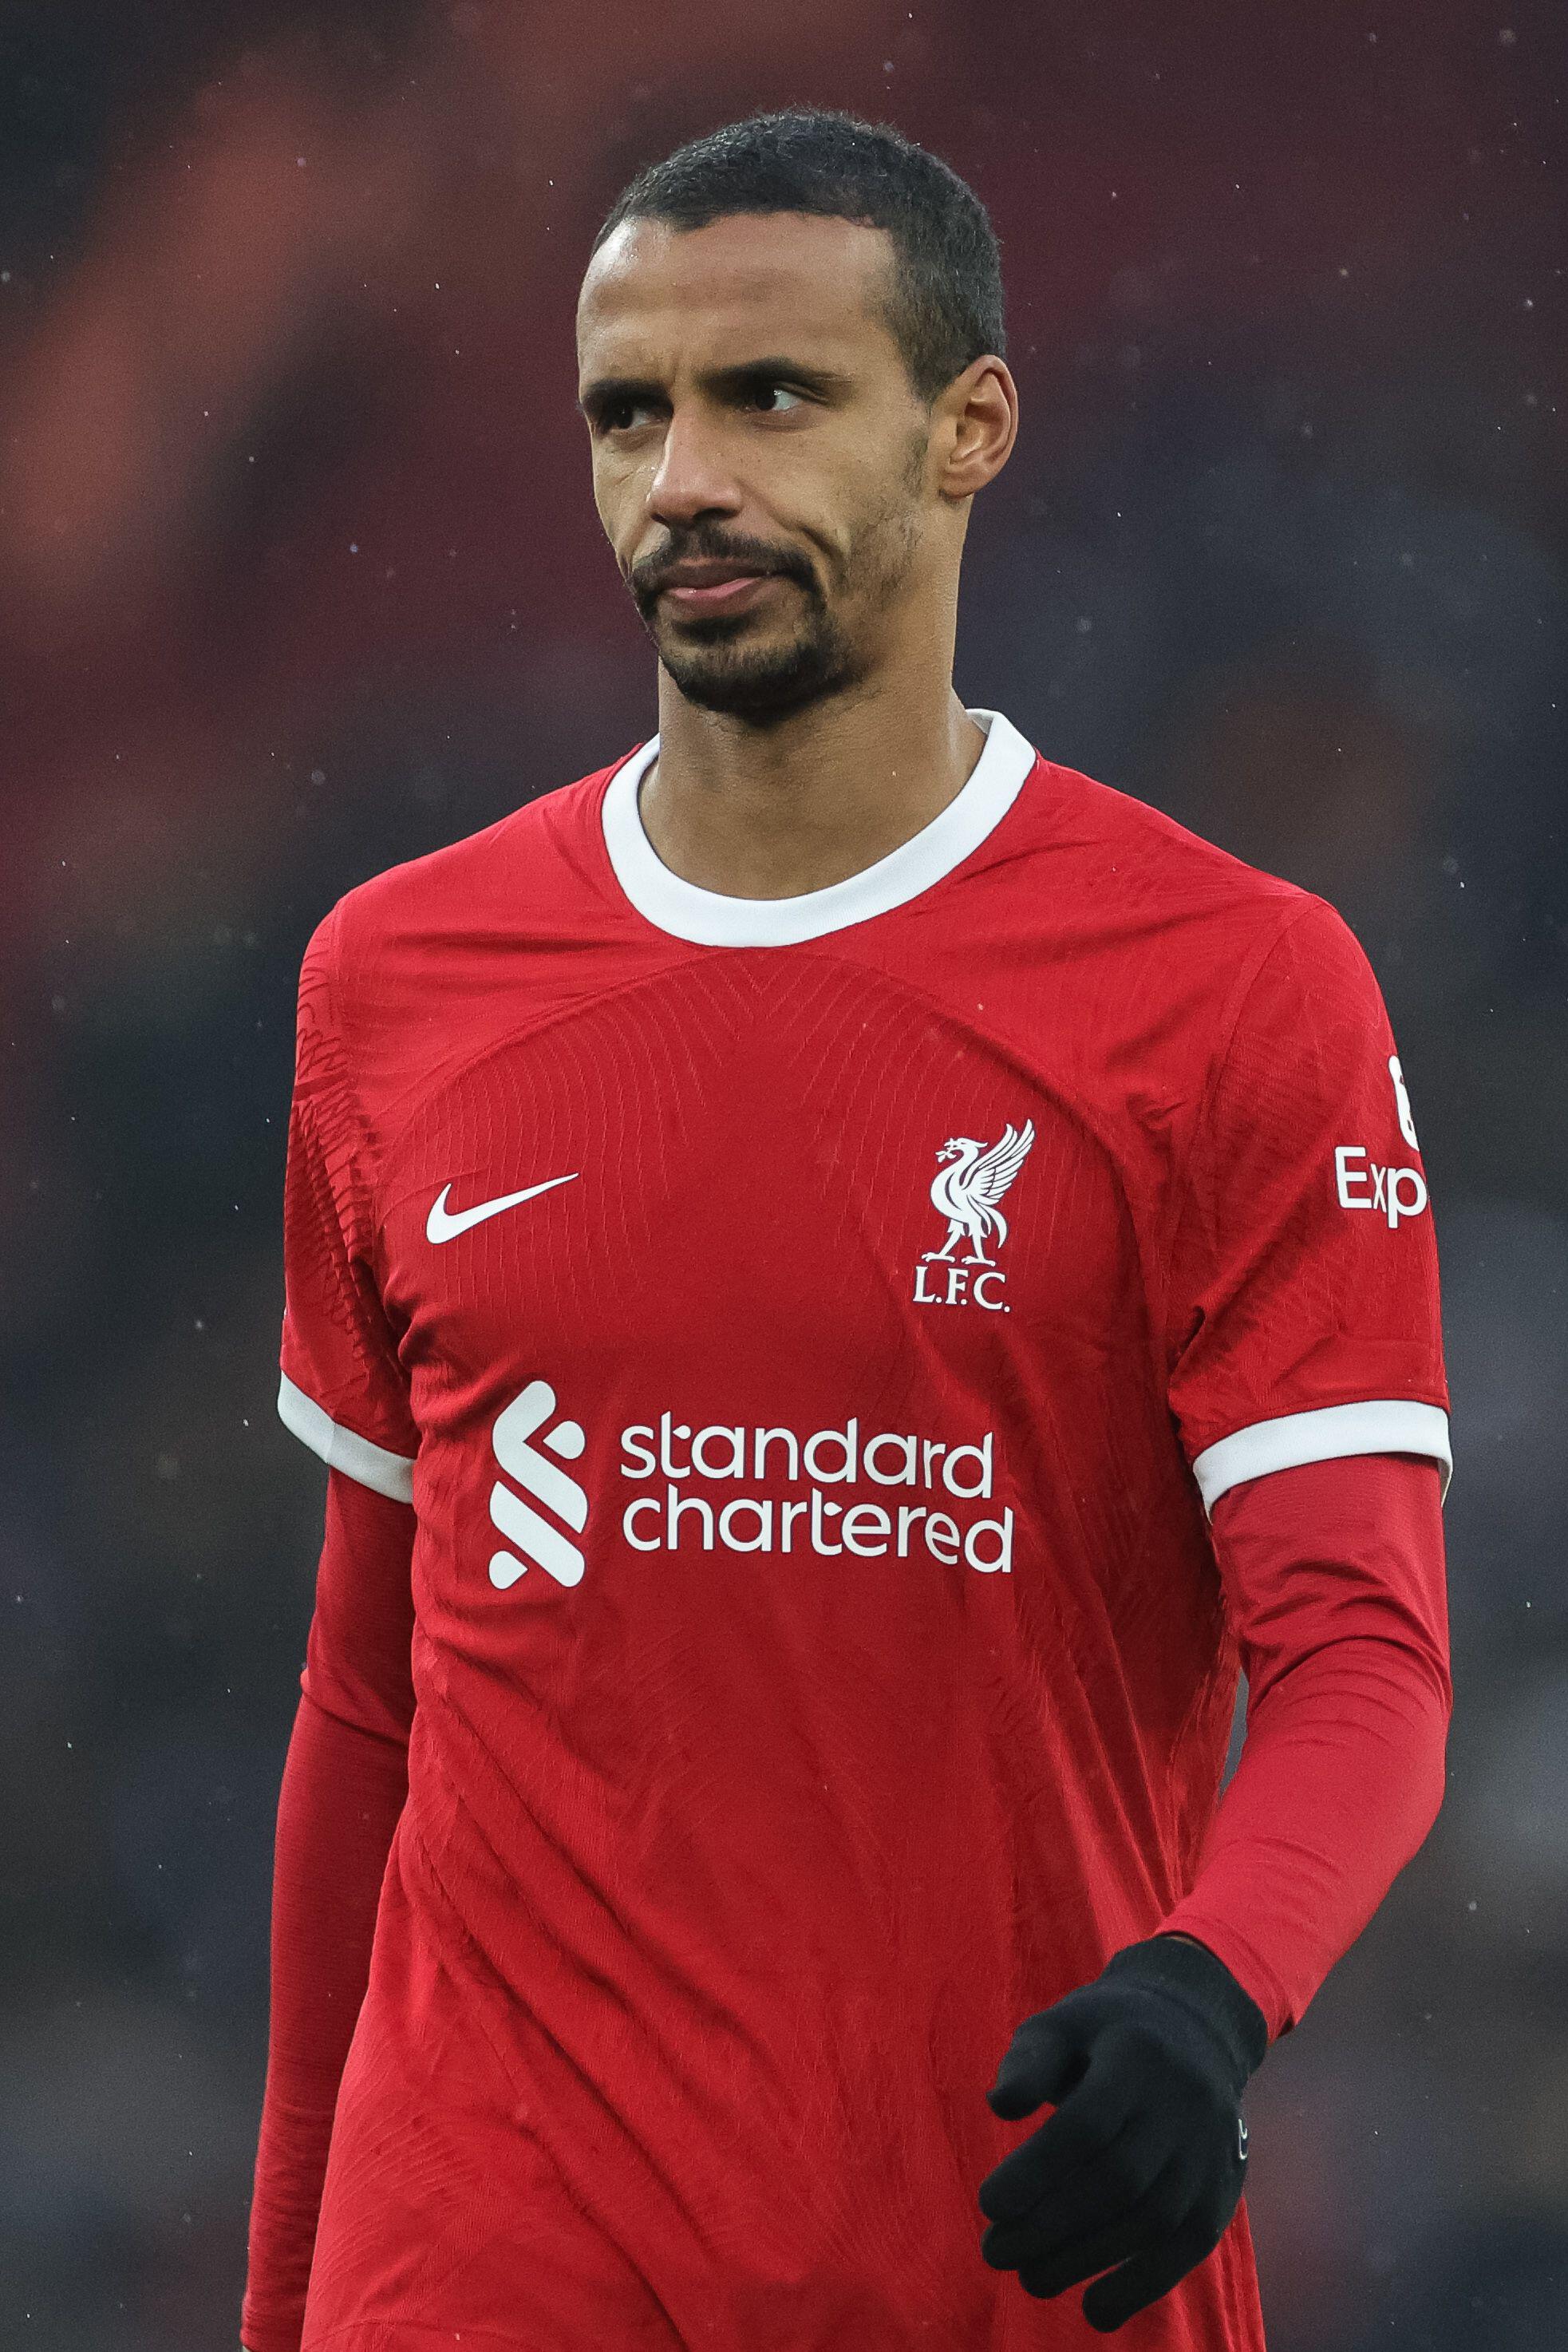 Joel Matip has been ruled out for the rest of the season with a ruptured ACL